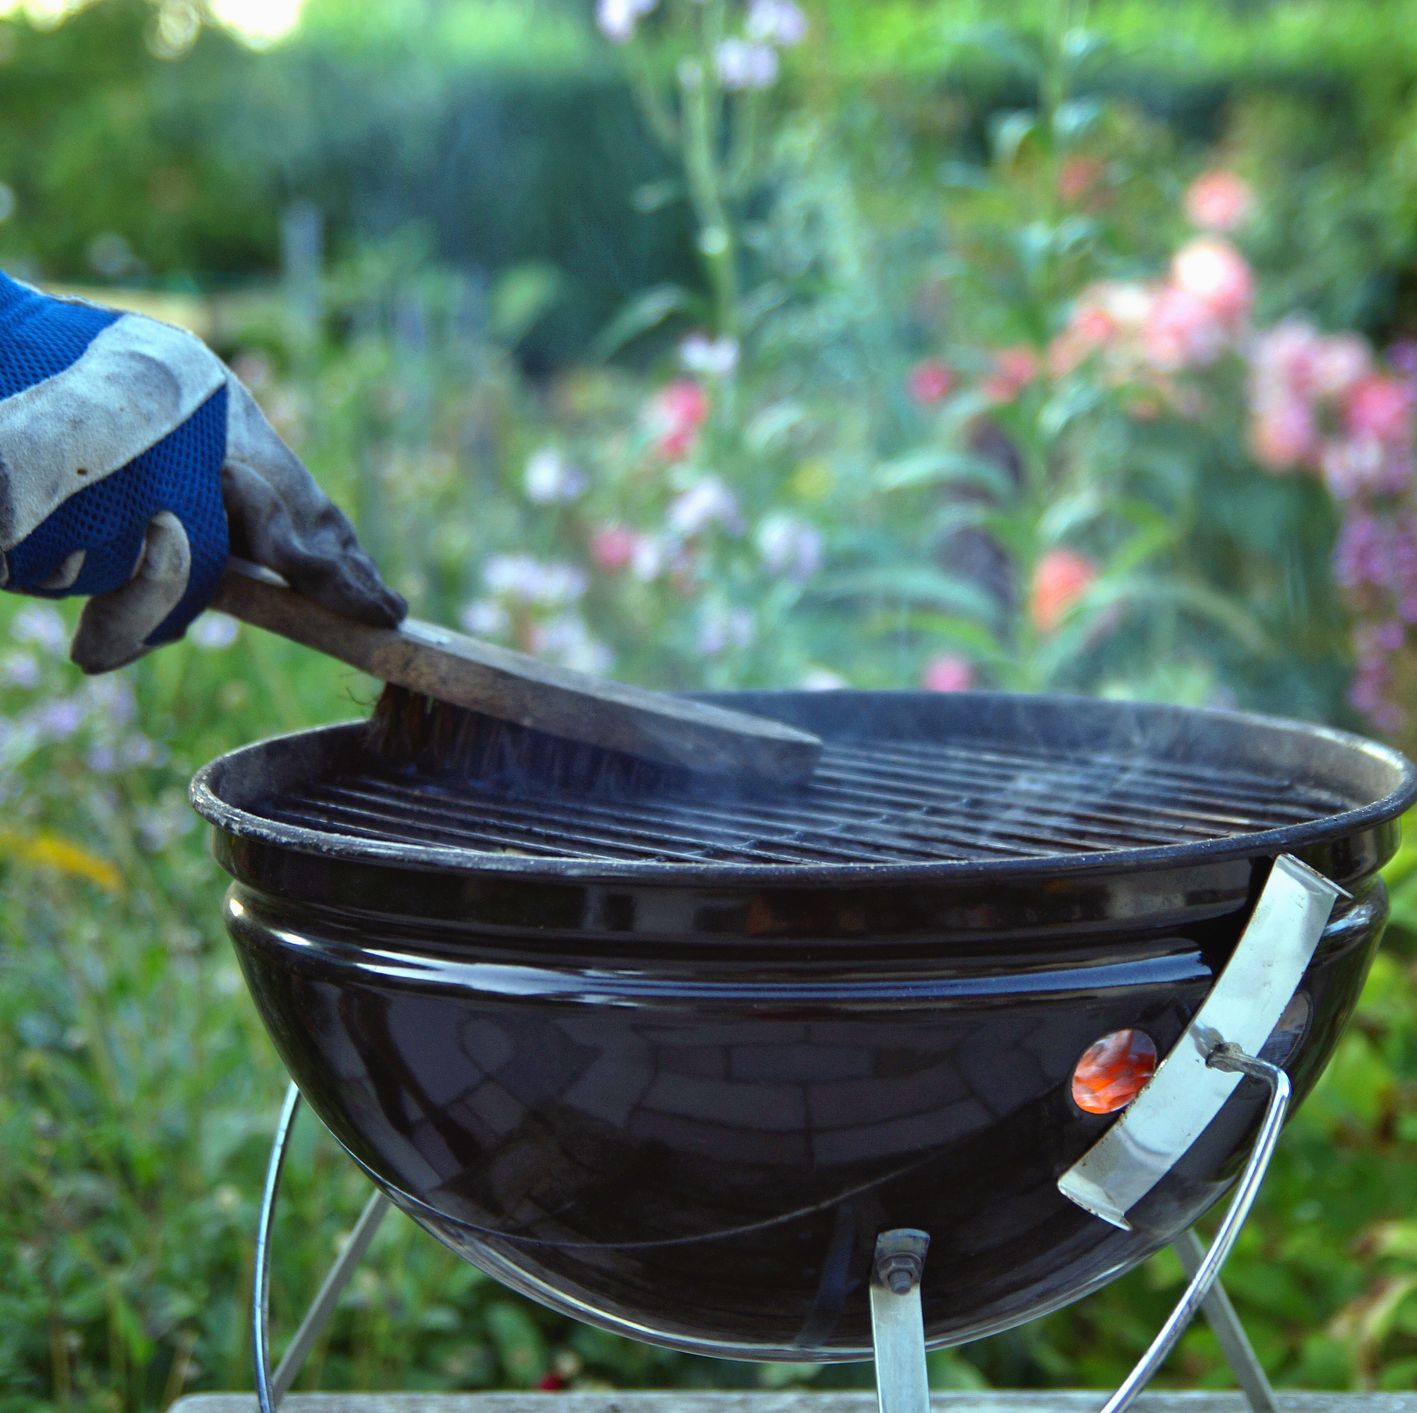 How To Clean A Barbecue - 12 BBQ Cleaner Hacks